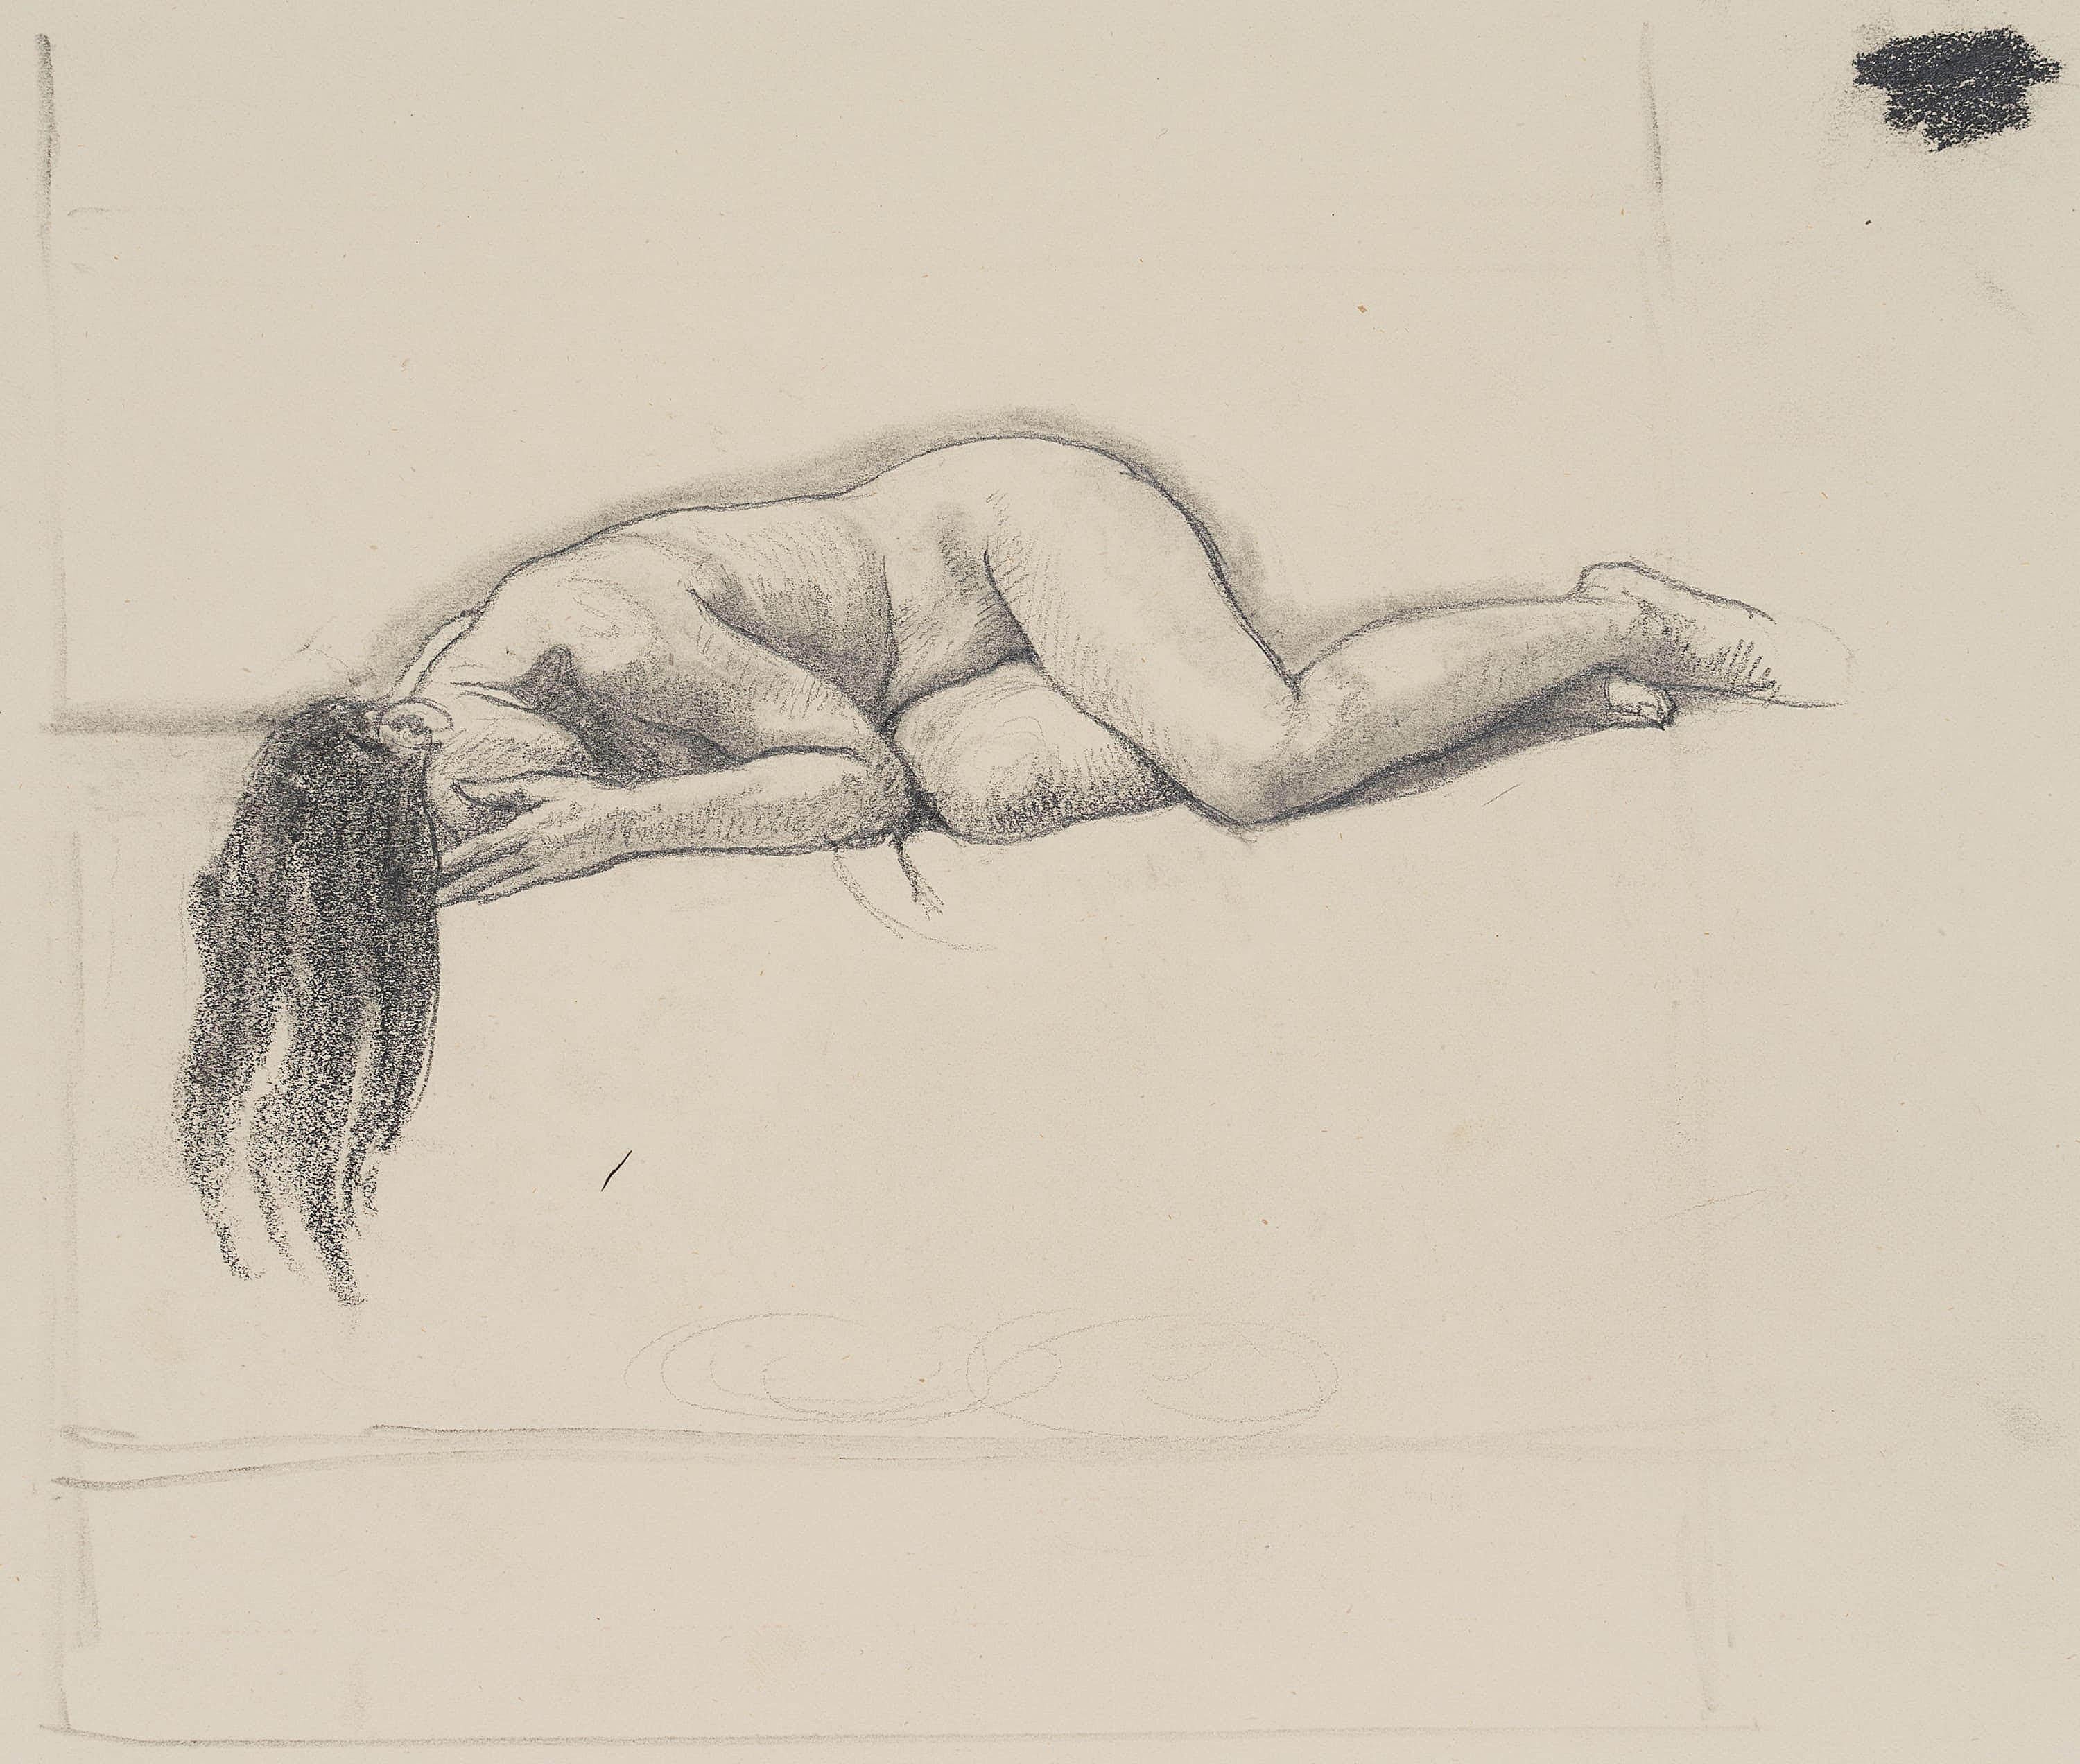 Carl August Walther (1880 Leipzig - 1956 Dresden): Mourners, Female Nude Crouching on the Ground, 20th century, Charcoal

Technique: Charcoal on Paper

Stamp: At the bottom Estate stamp, Carl Walther. Dresden. 20th century

Date: 20th